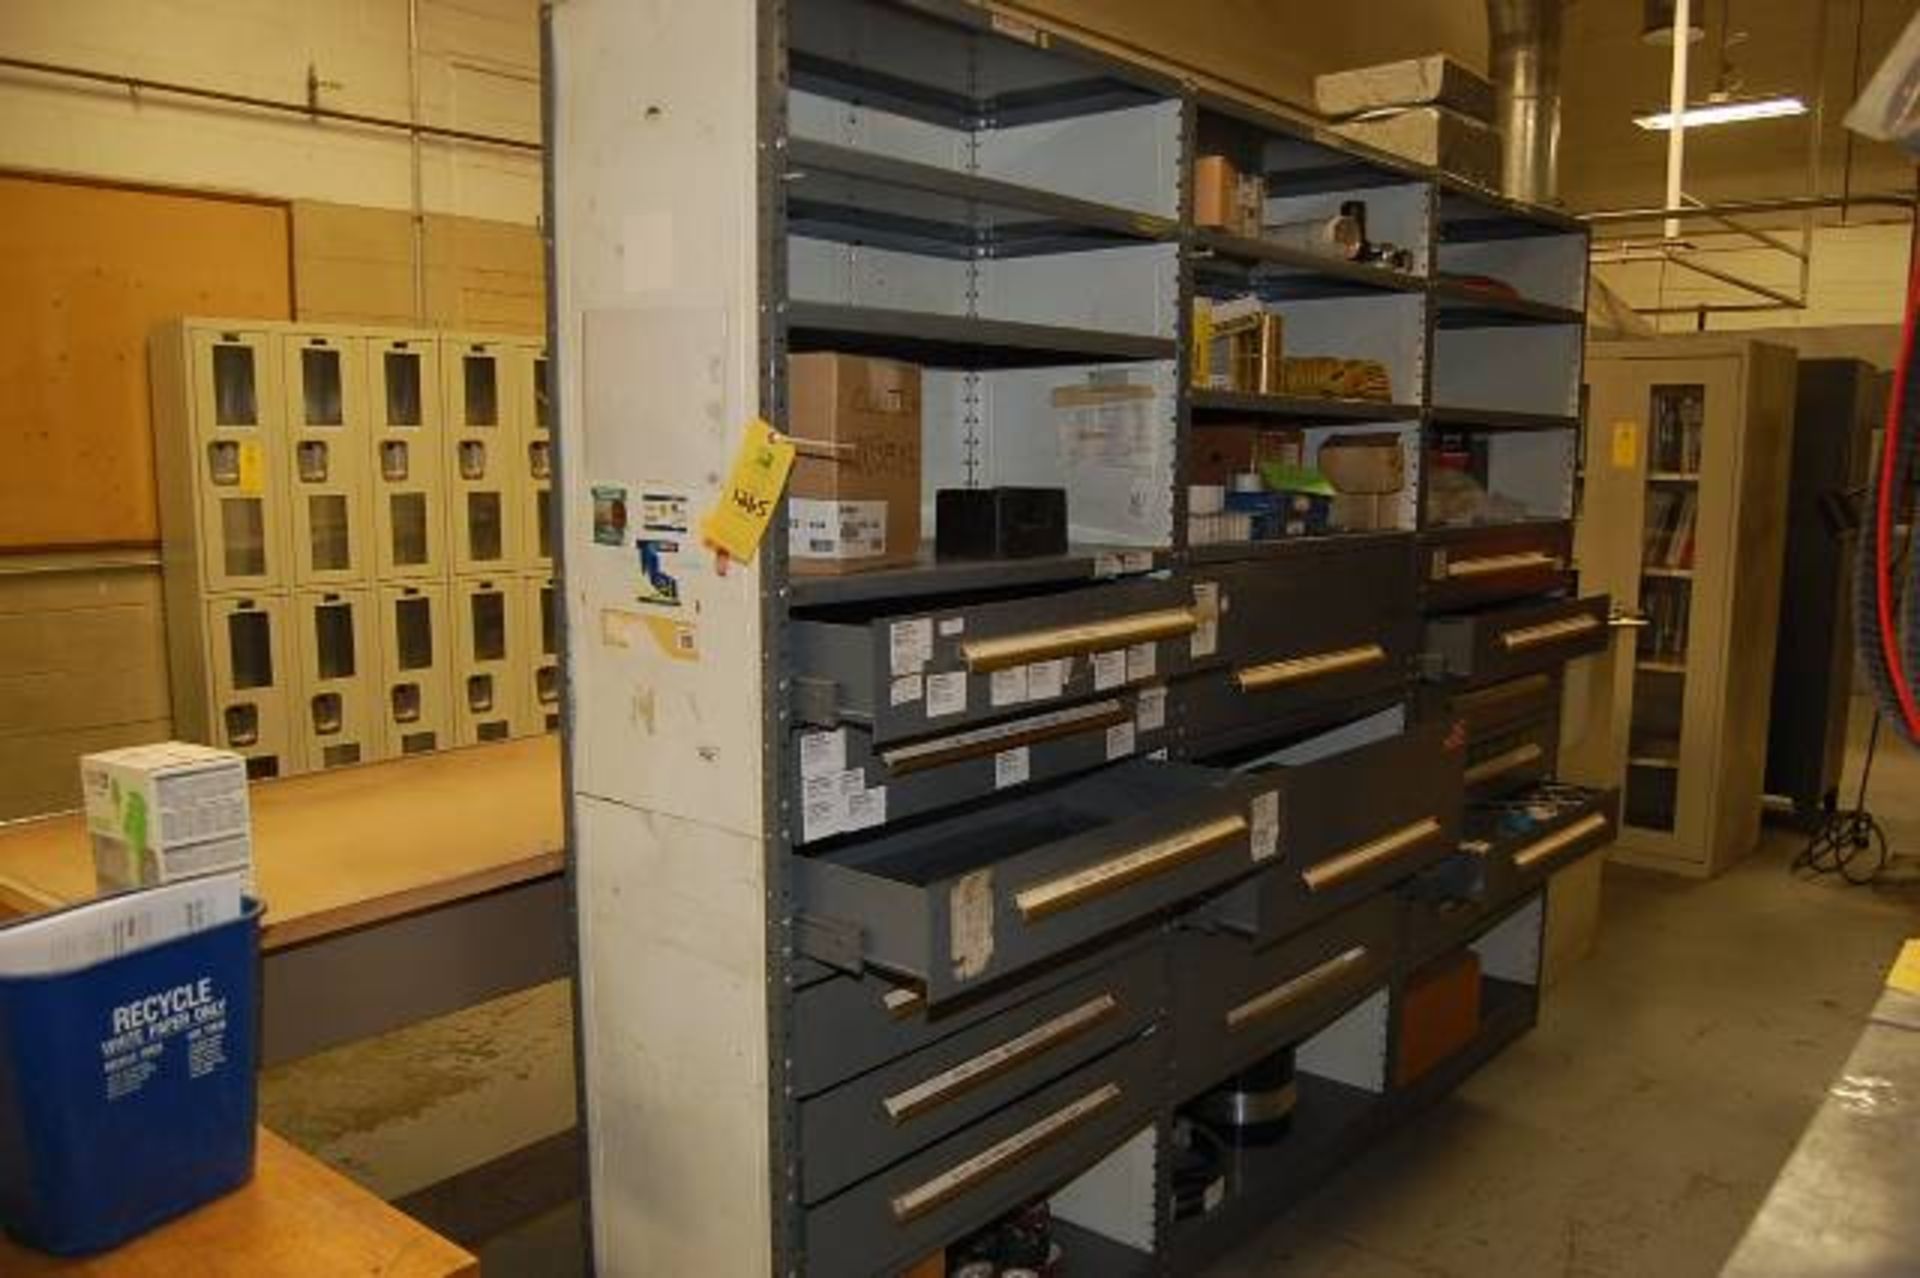 (3) Equipto Shelf Units, Includes Roller Type Drawers